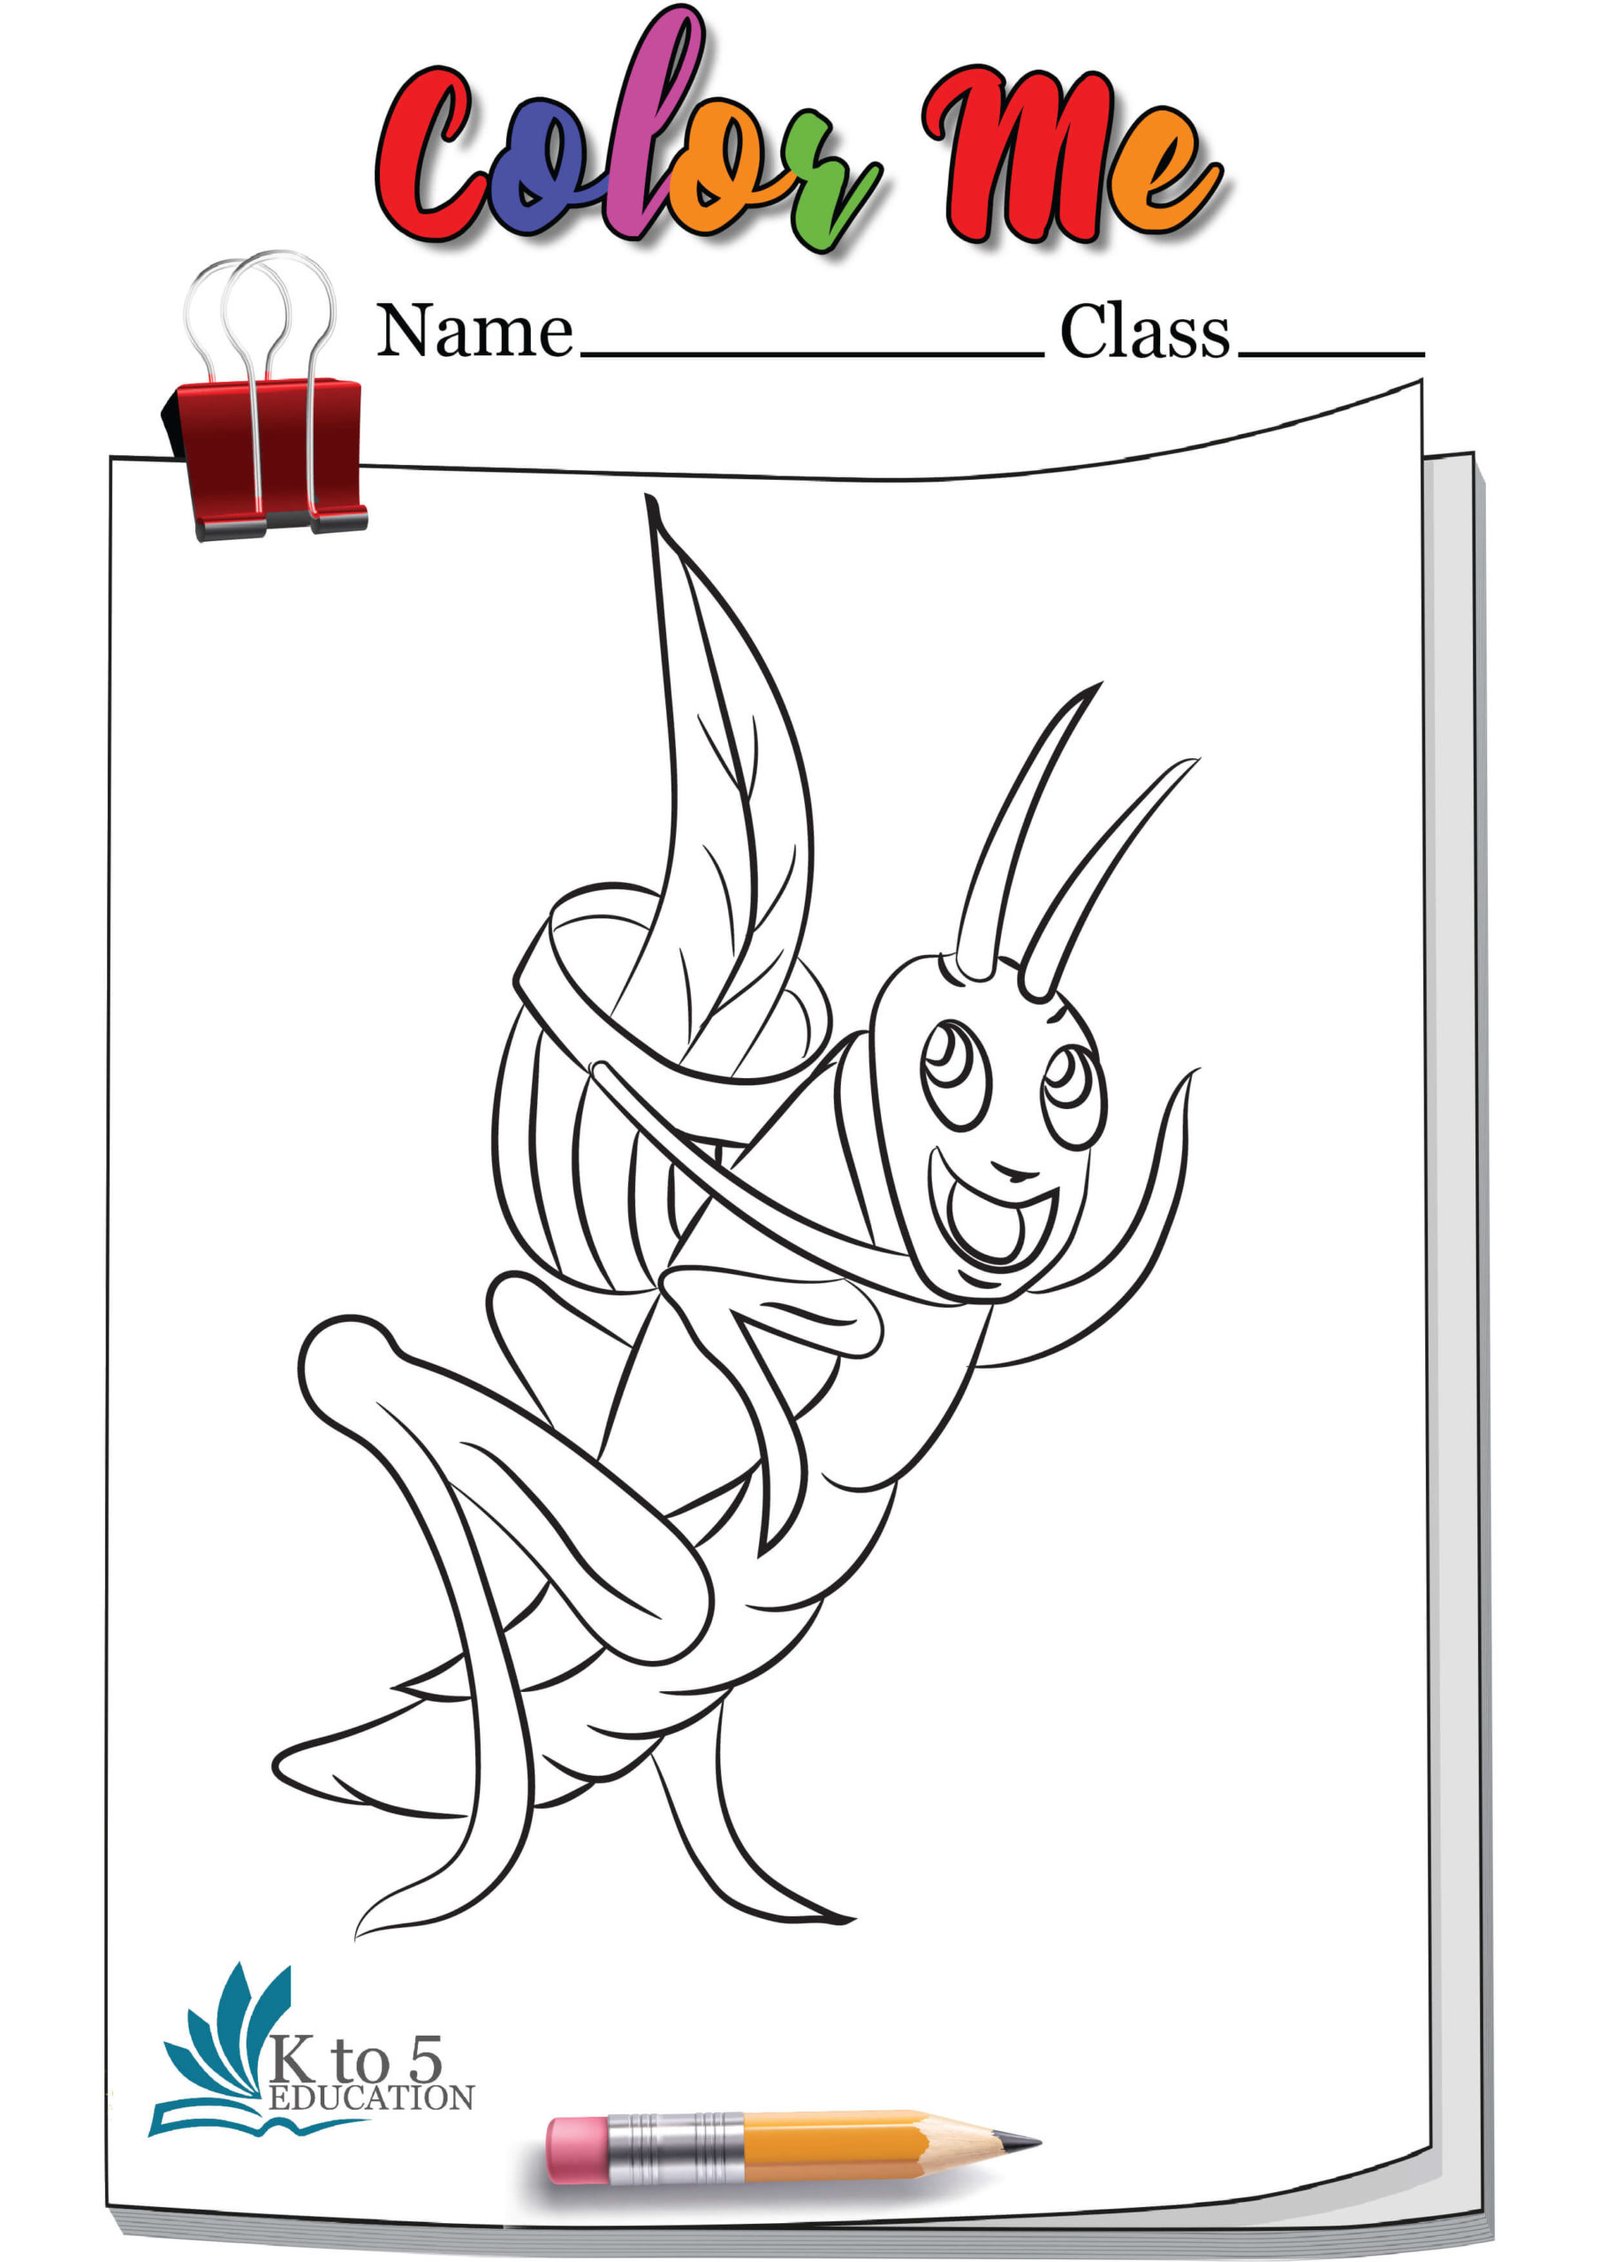 Leaf collecting Caterpillar coloring page worksheet